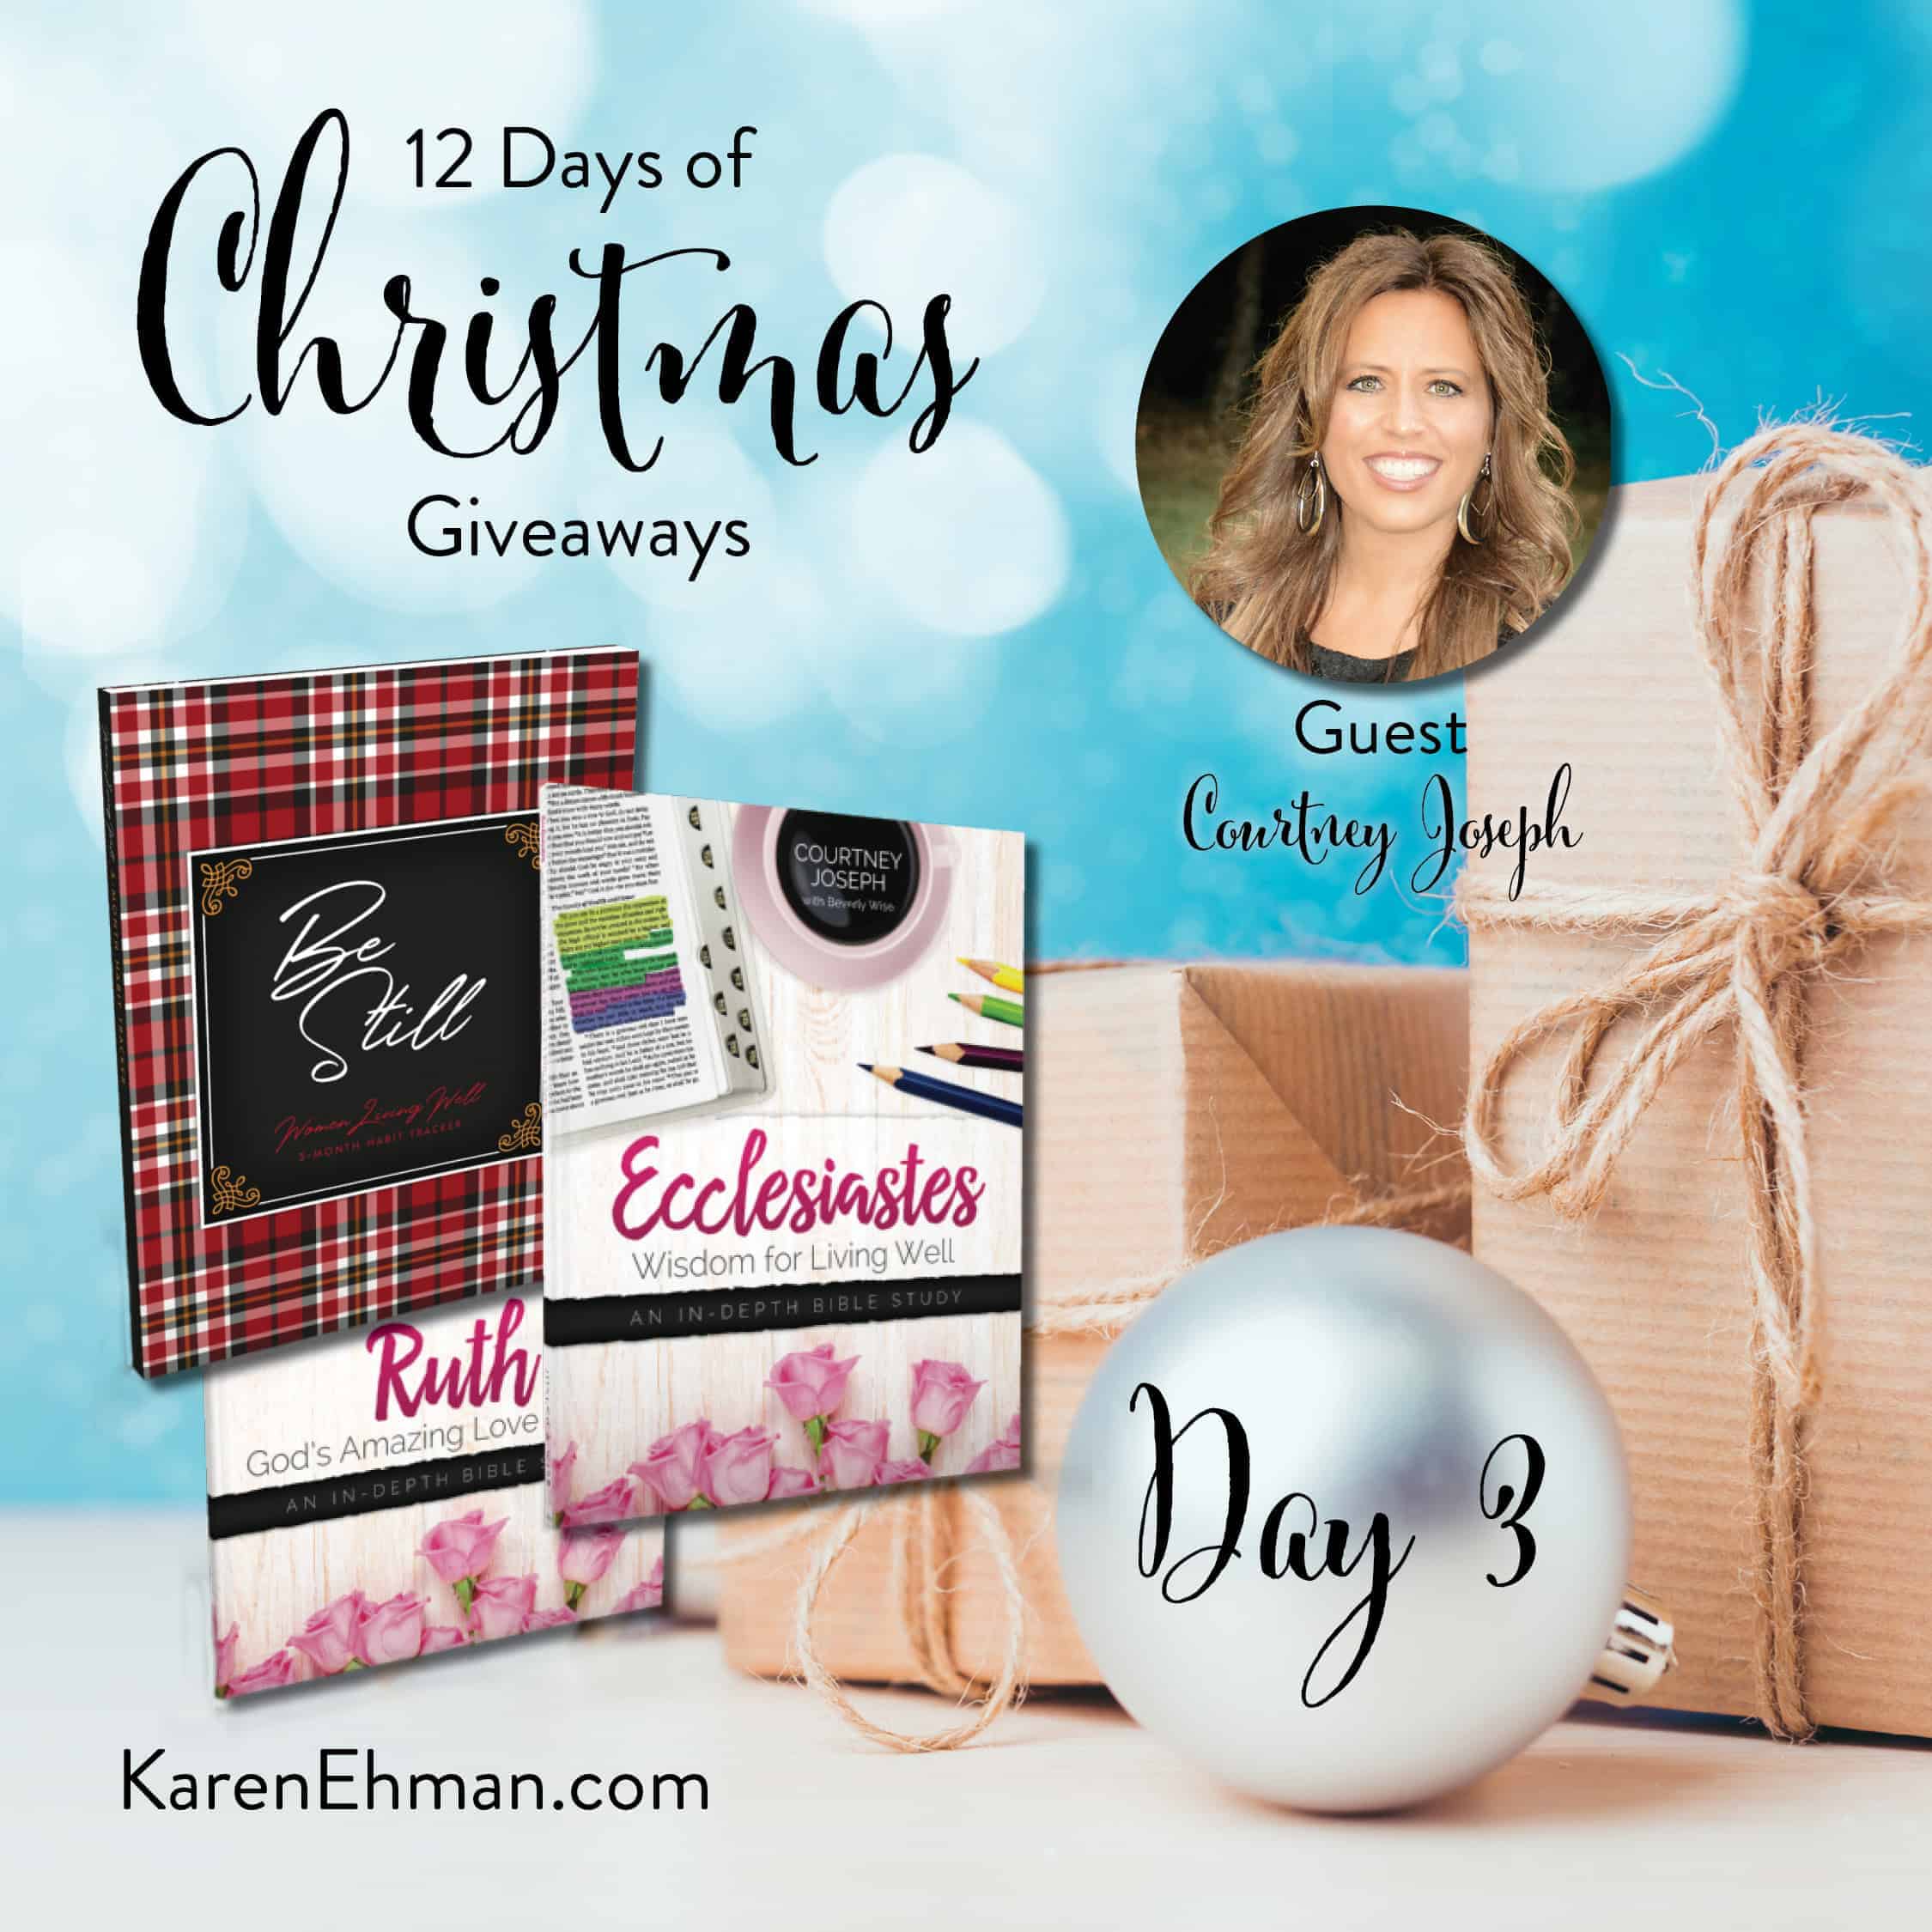 Day 3 of 12 Days of Christmas Giveaways (with Courtney Joseph)